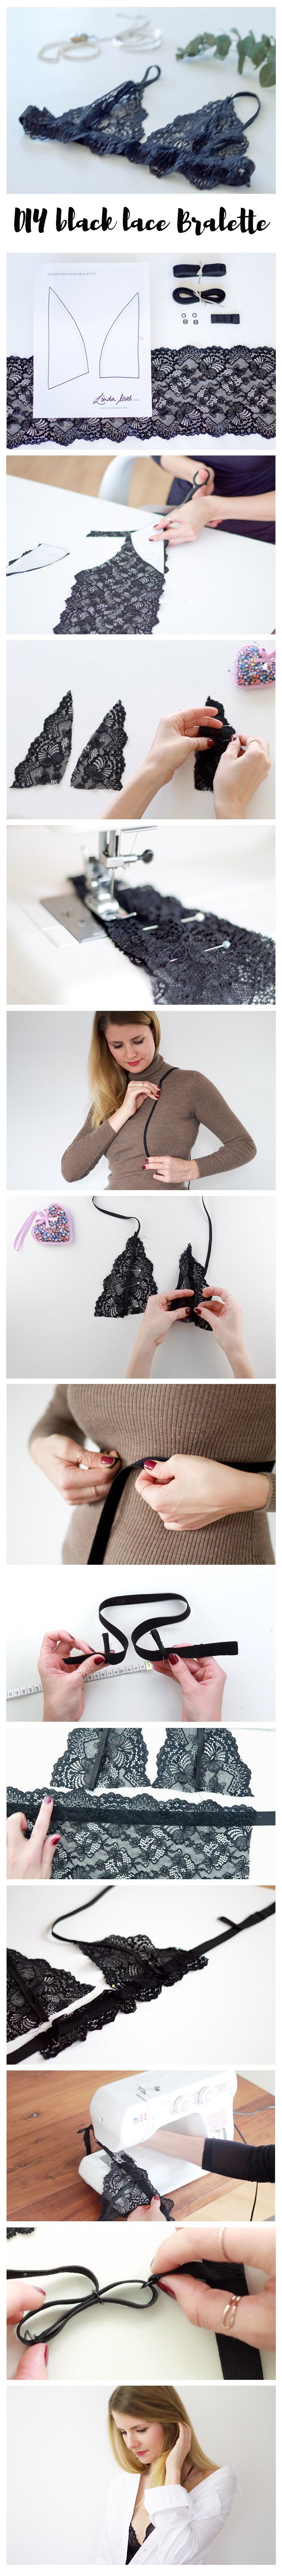 Black lace Bralette DIY – A fun and easy do it yourself project for the summer …